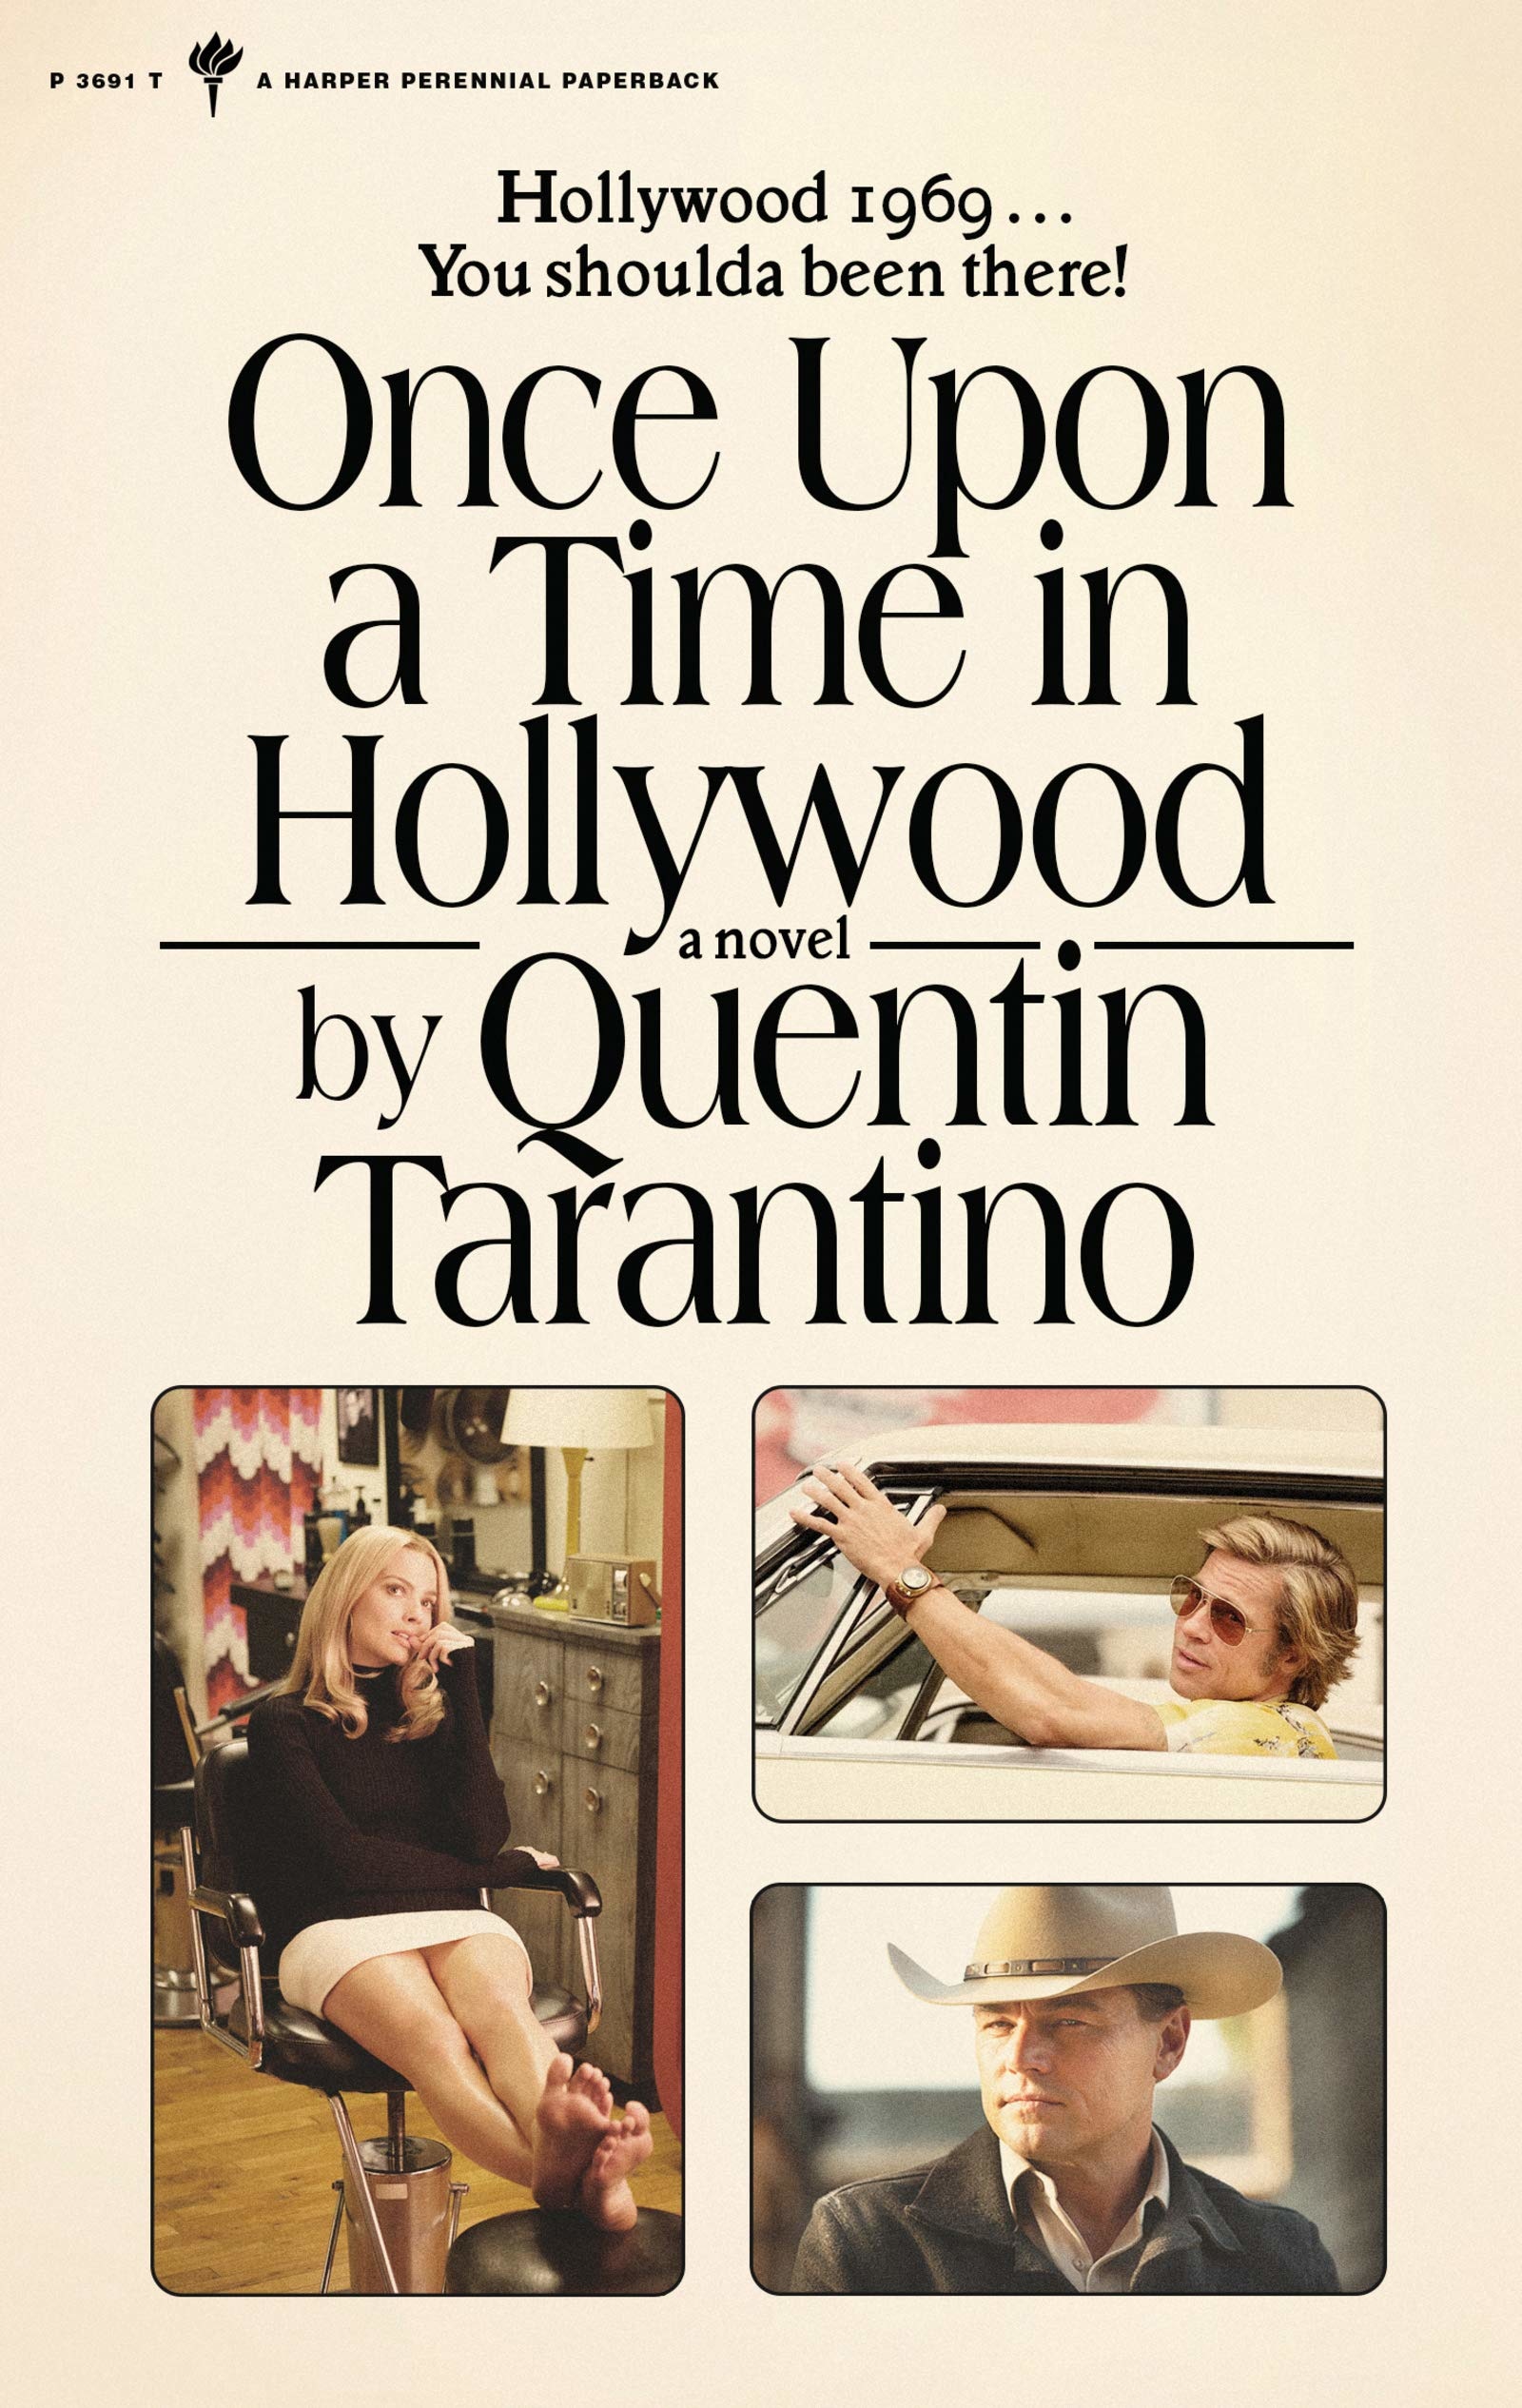 Book “Once Upon a Time in Hollywood” by Quentin Tarantino